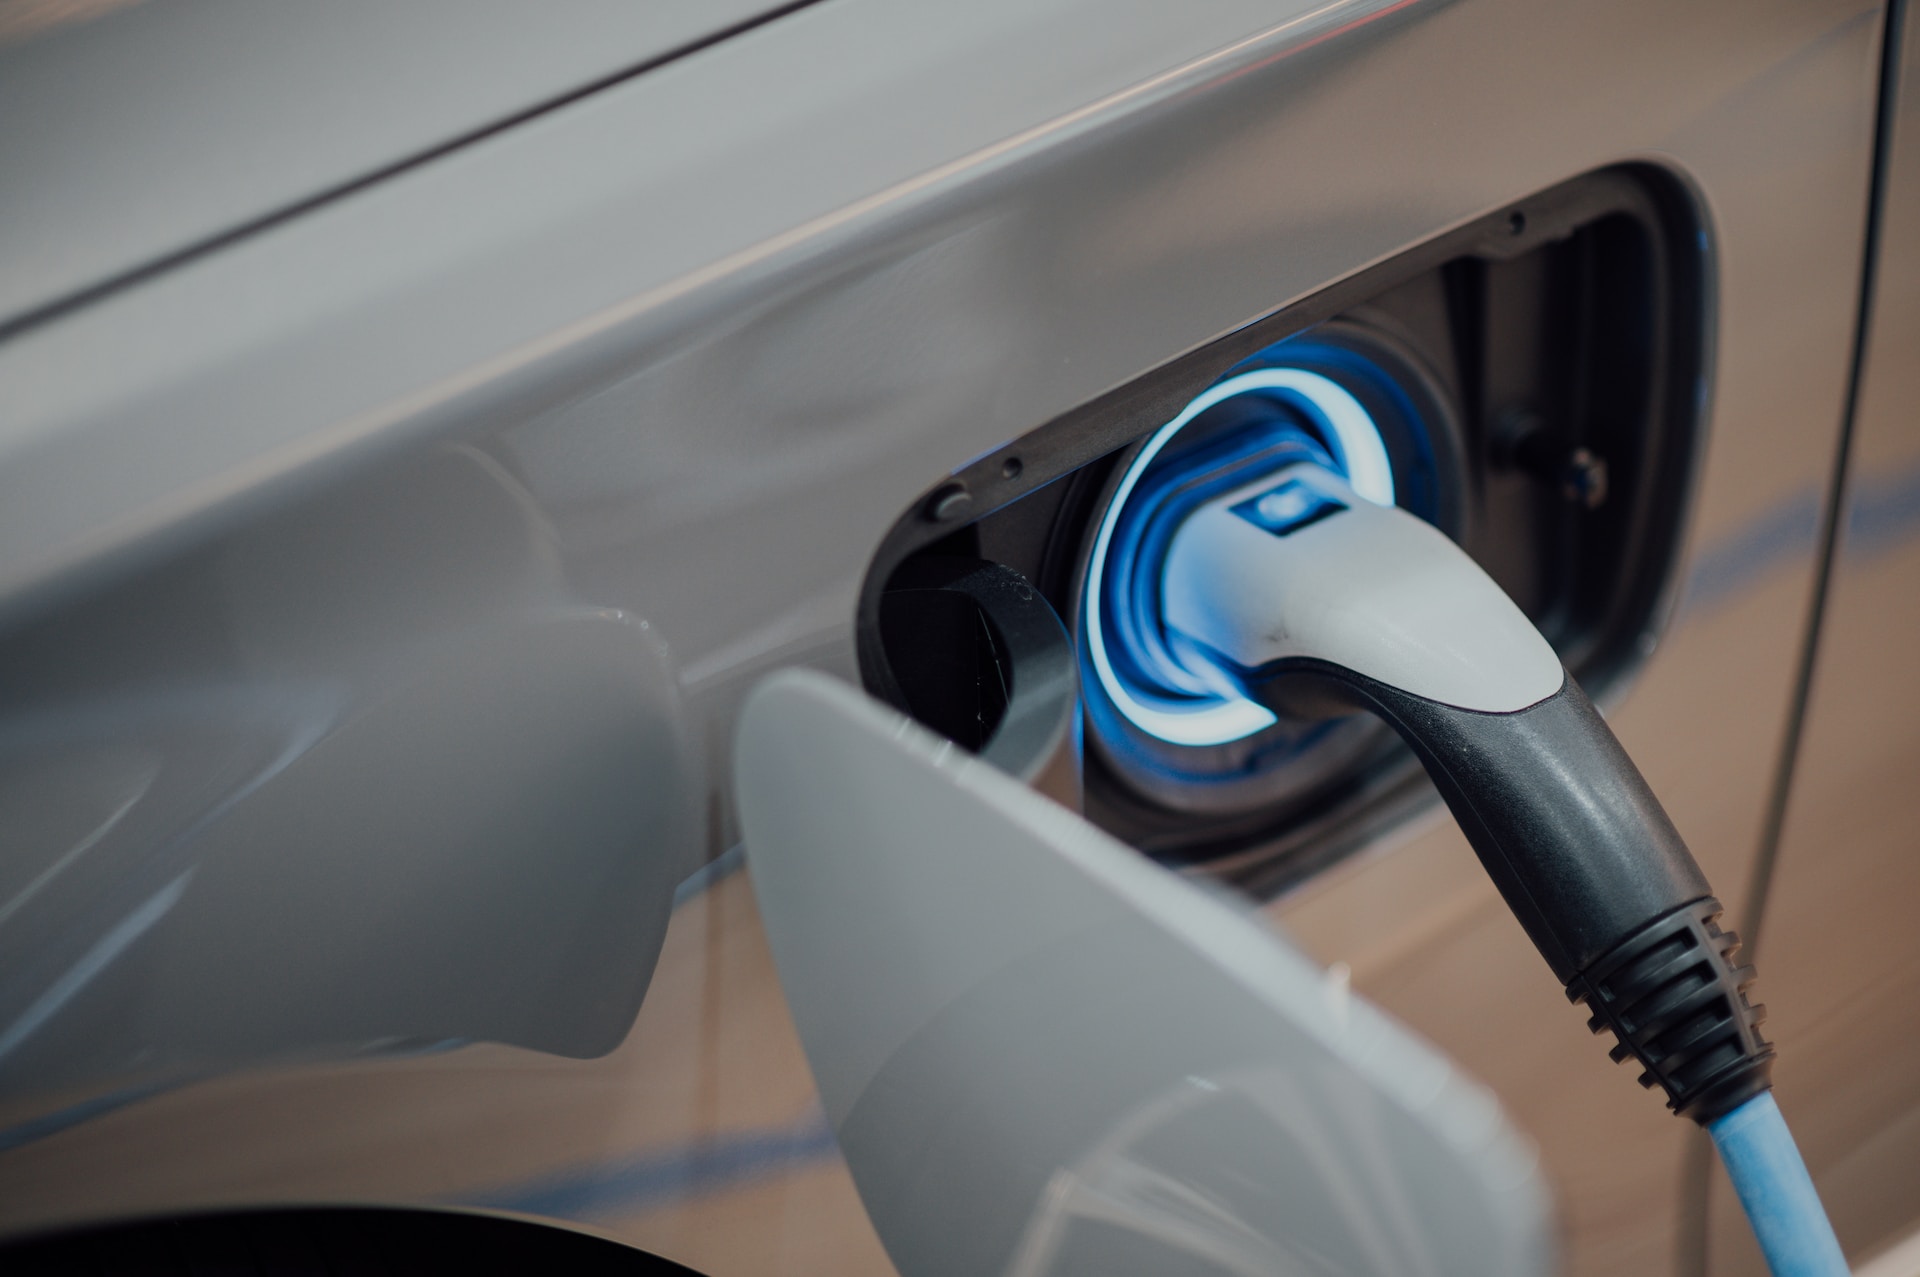 A photograph of a plugged-in electric vehicle charger, with a glowing blue LED light surrounding the charging plug. 